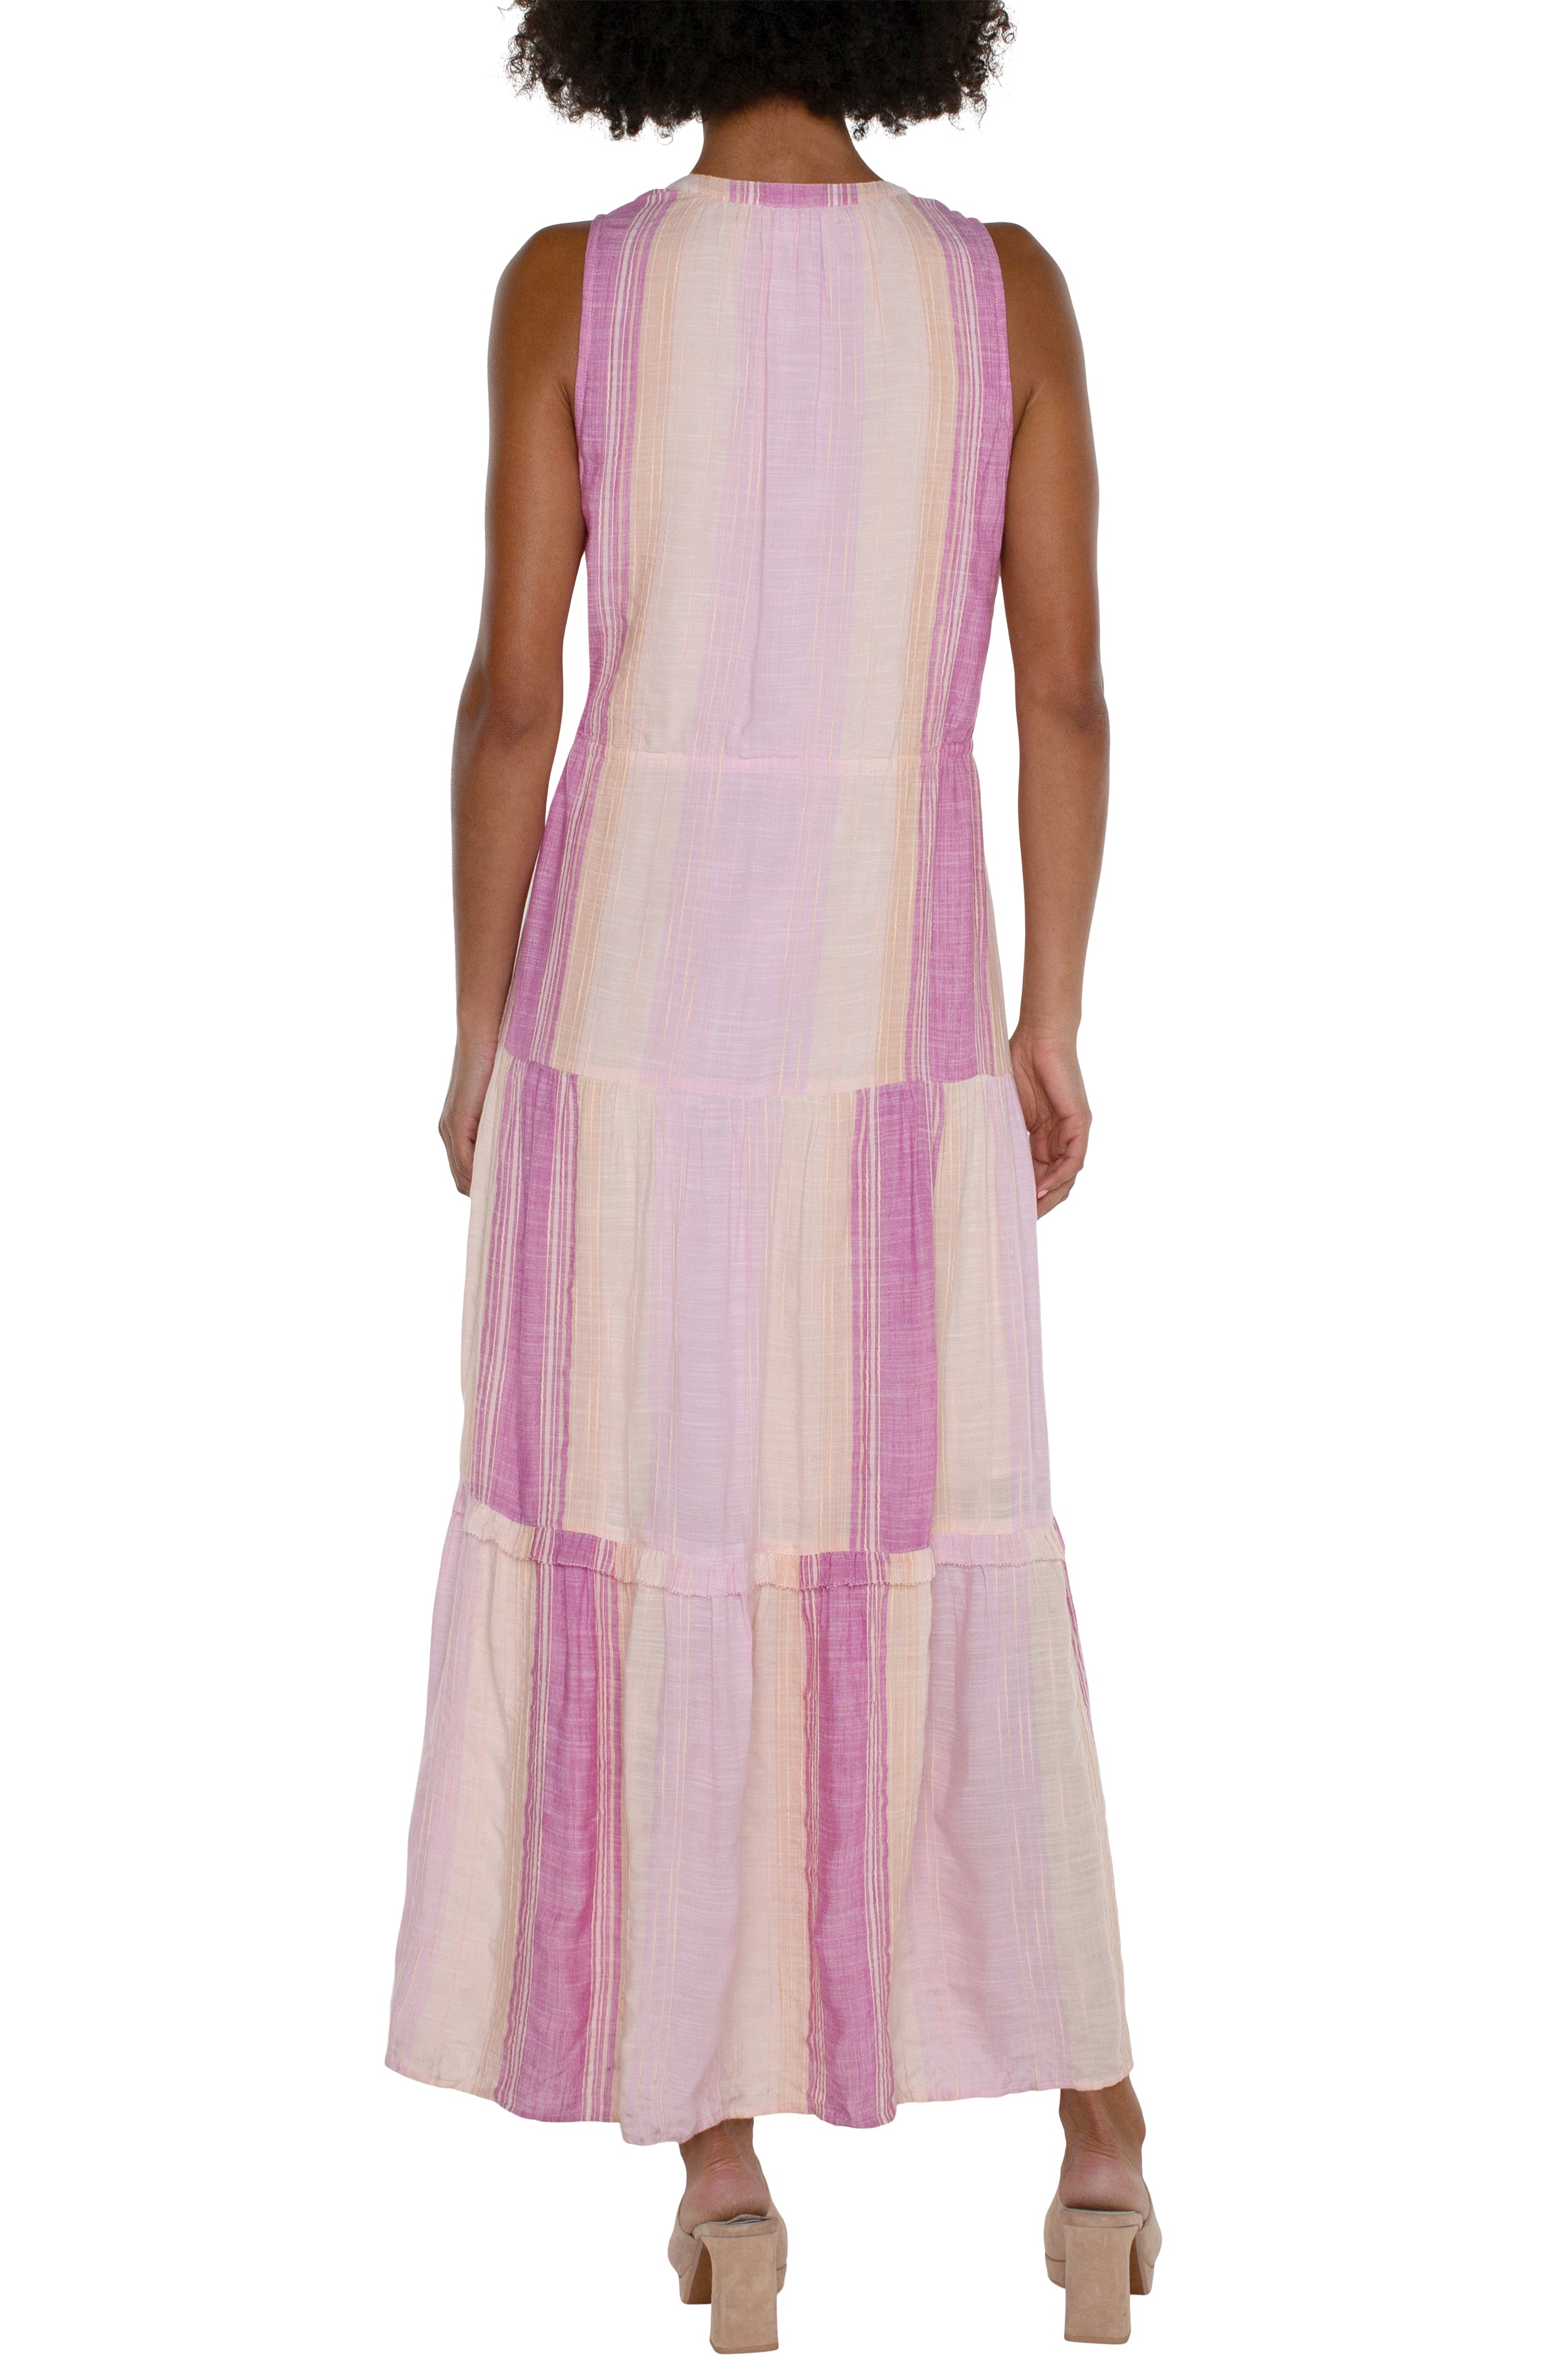 LVP Slvless Tiered Maxi Dress - Lavender Back View